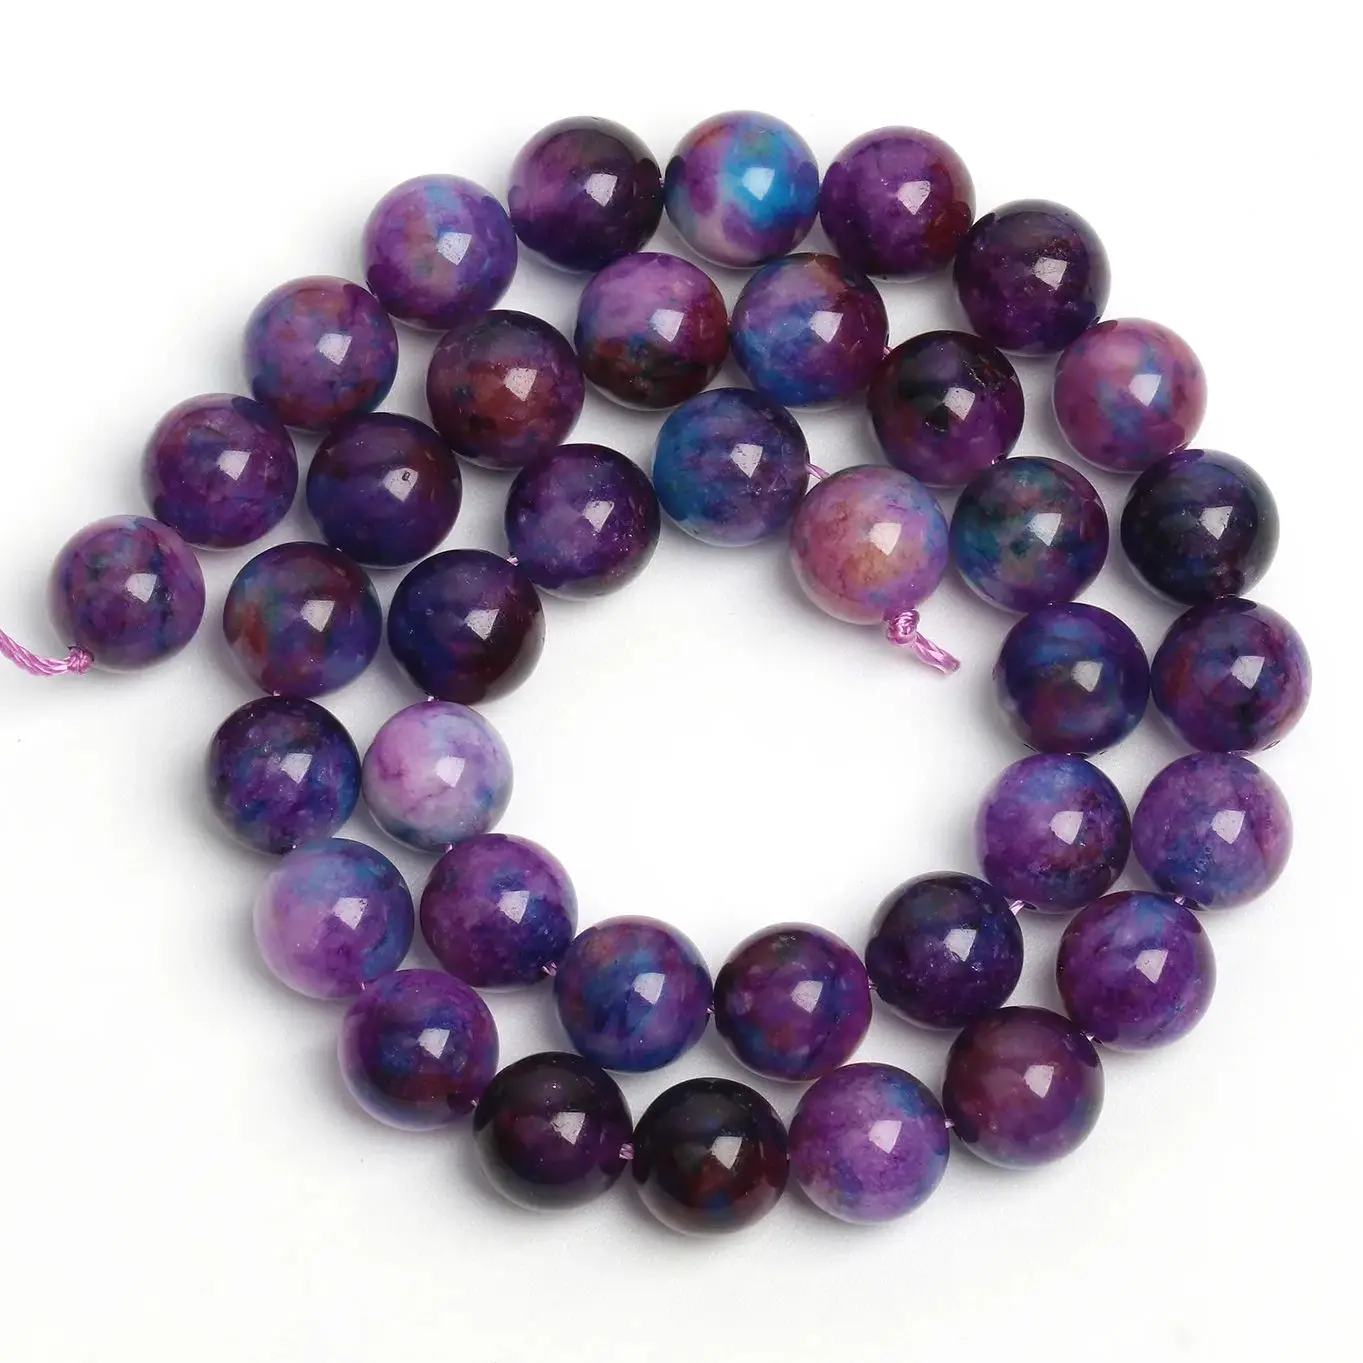 

6 8 10mm Nature Stone Light Purple Starry Sky Round Beads Spacer Beads Jewelry Making DIY Earring Bracelets Necklaces Accessory